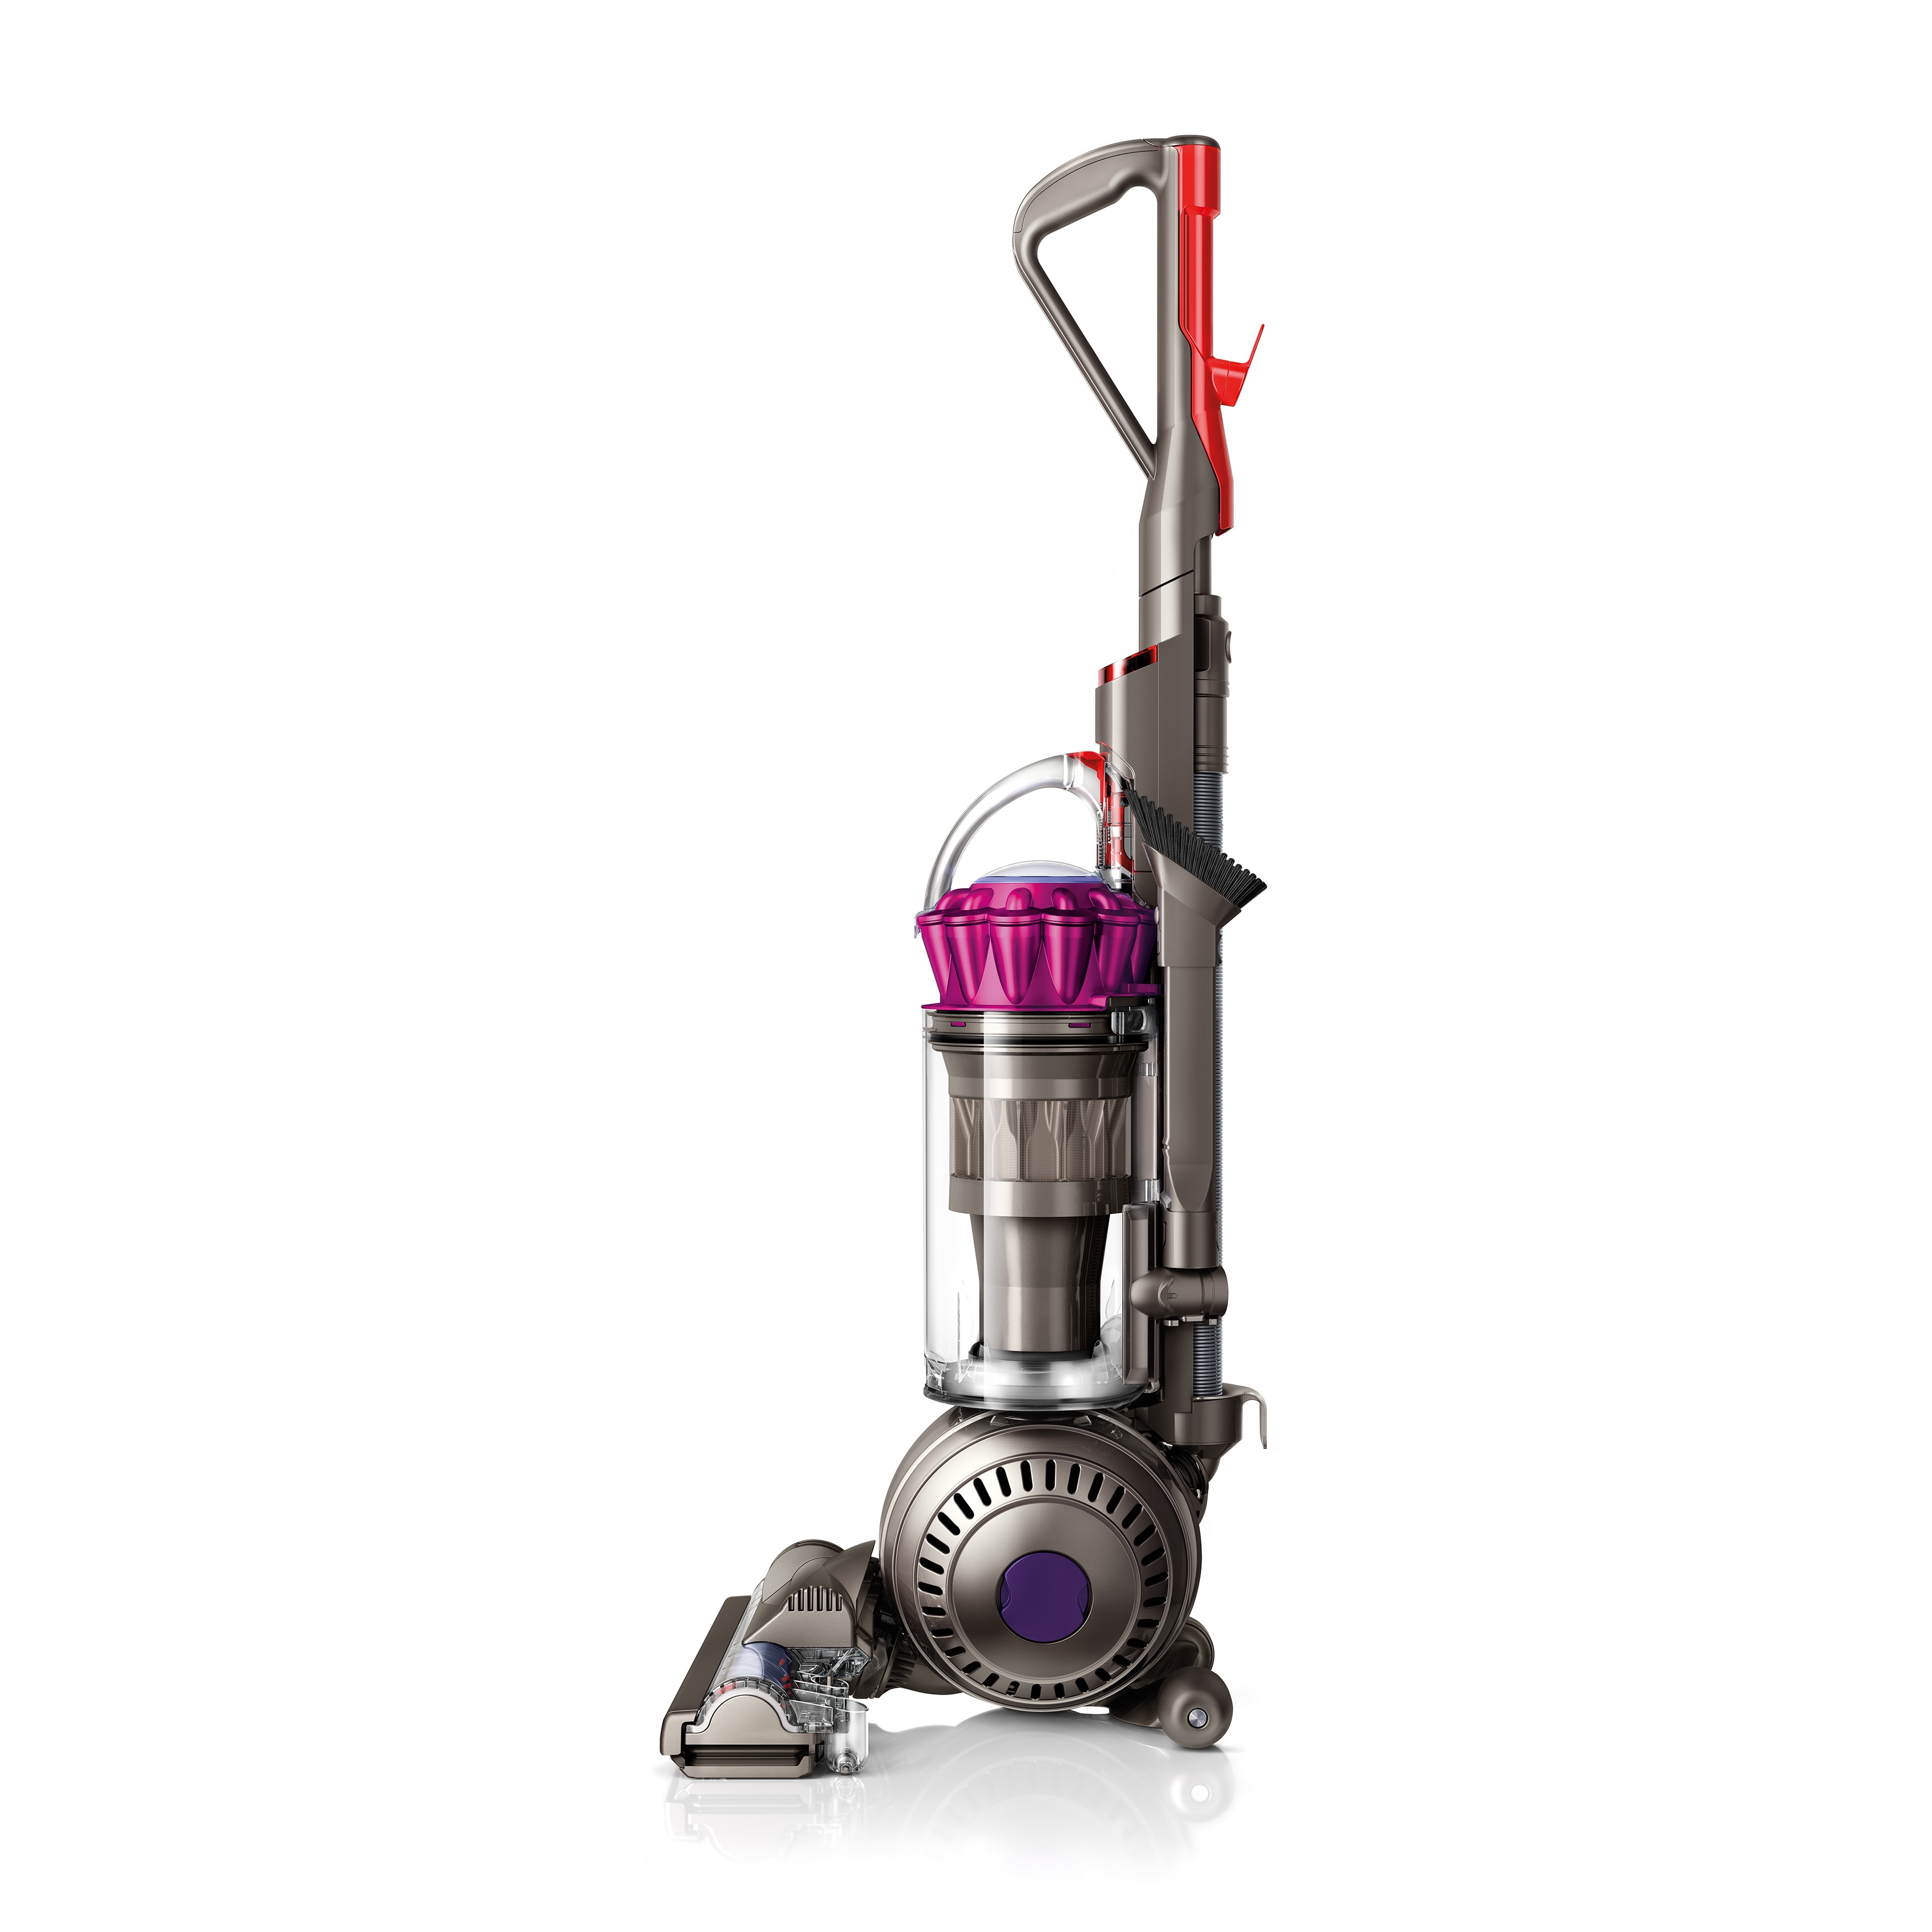 Dyson Dc65 Animal Complete Upright Vacuum Cleaner (new)